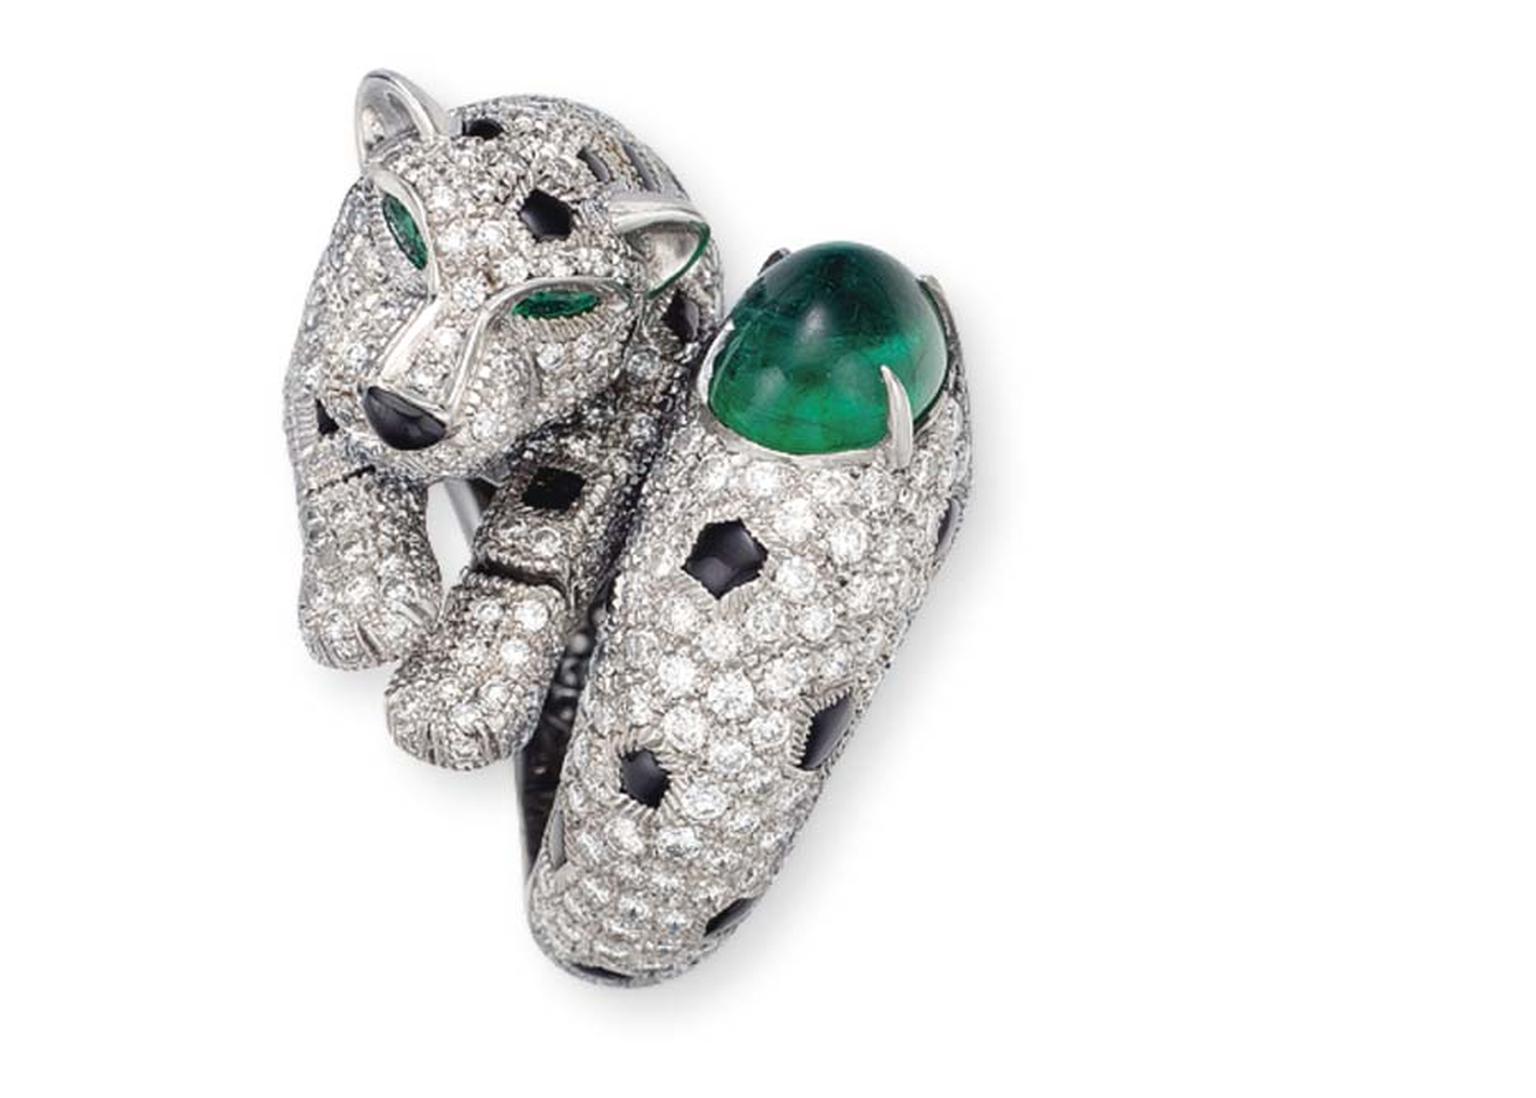 This Cartier emerald, diamond and onyx Panther ring doubled its pre-sale estimate at Christie’s Important Jewels sale in New York in 2014.